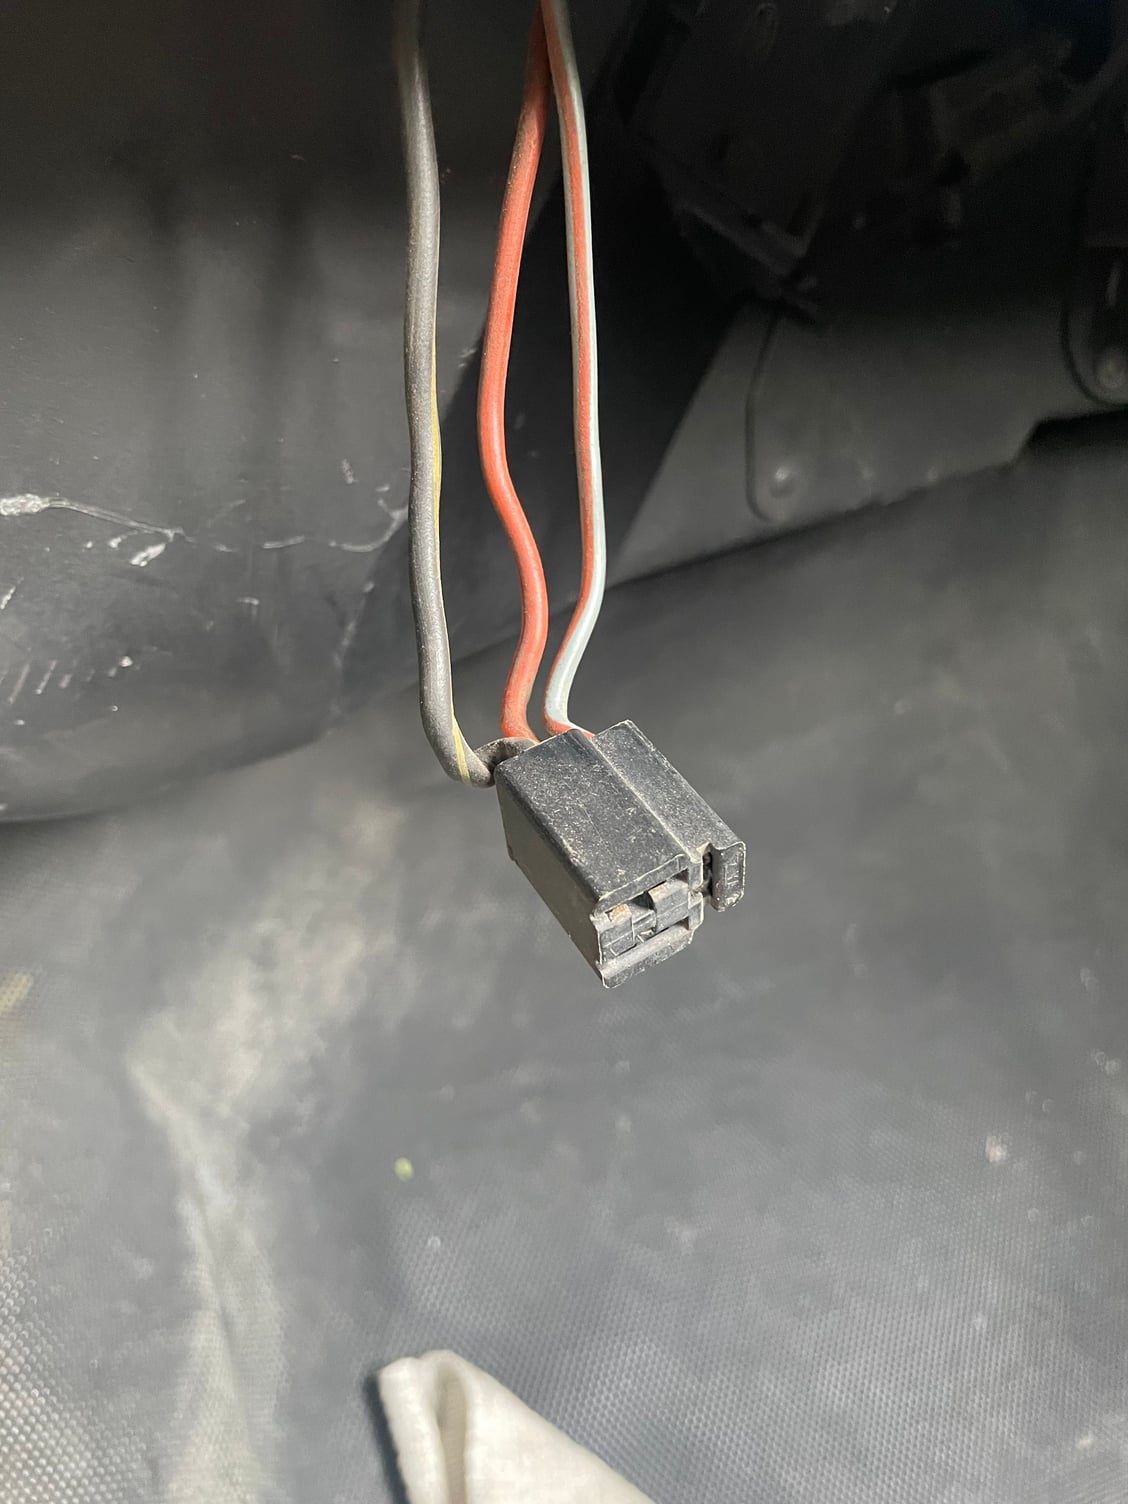 78 f150 dash mystery electrical connections - Ford Truck 